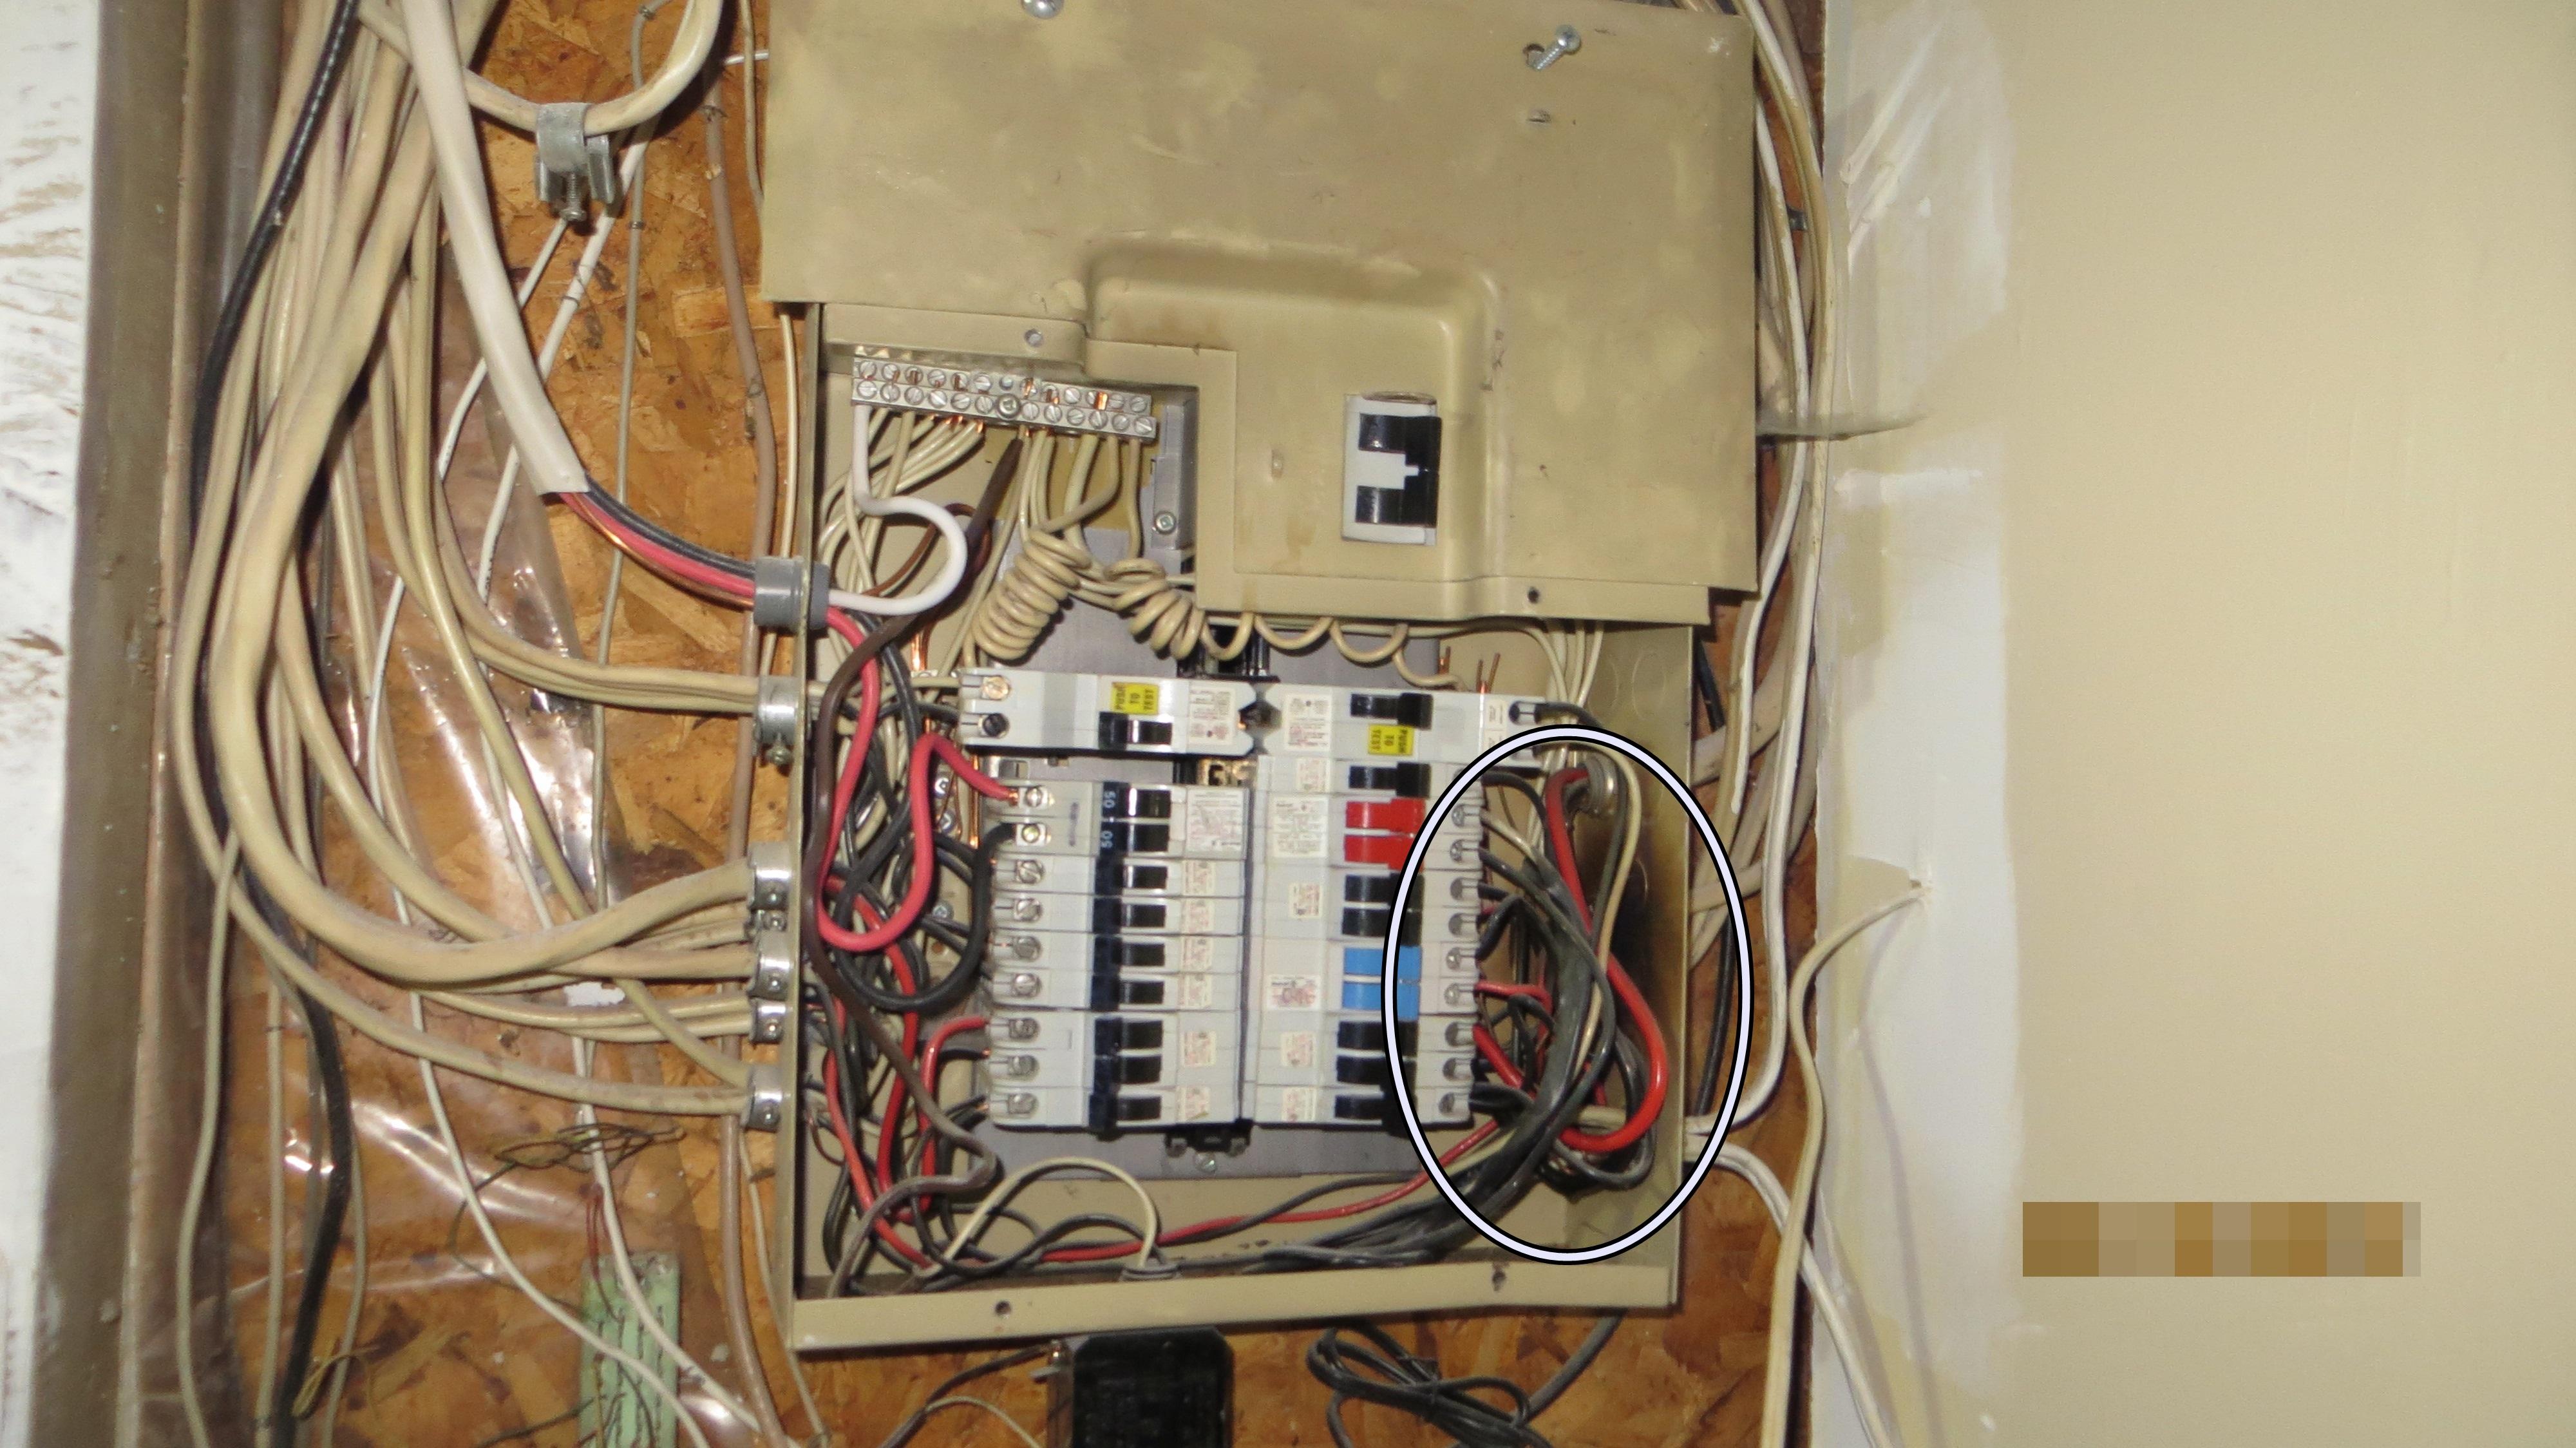 Fire in Electrical Panel